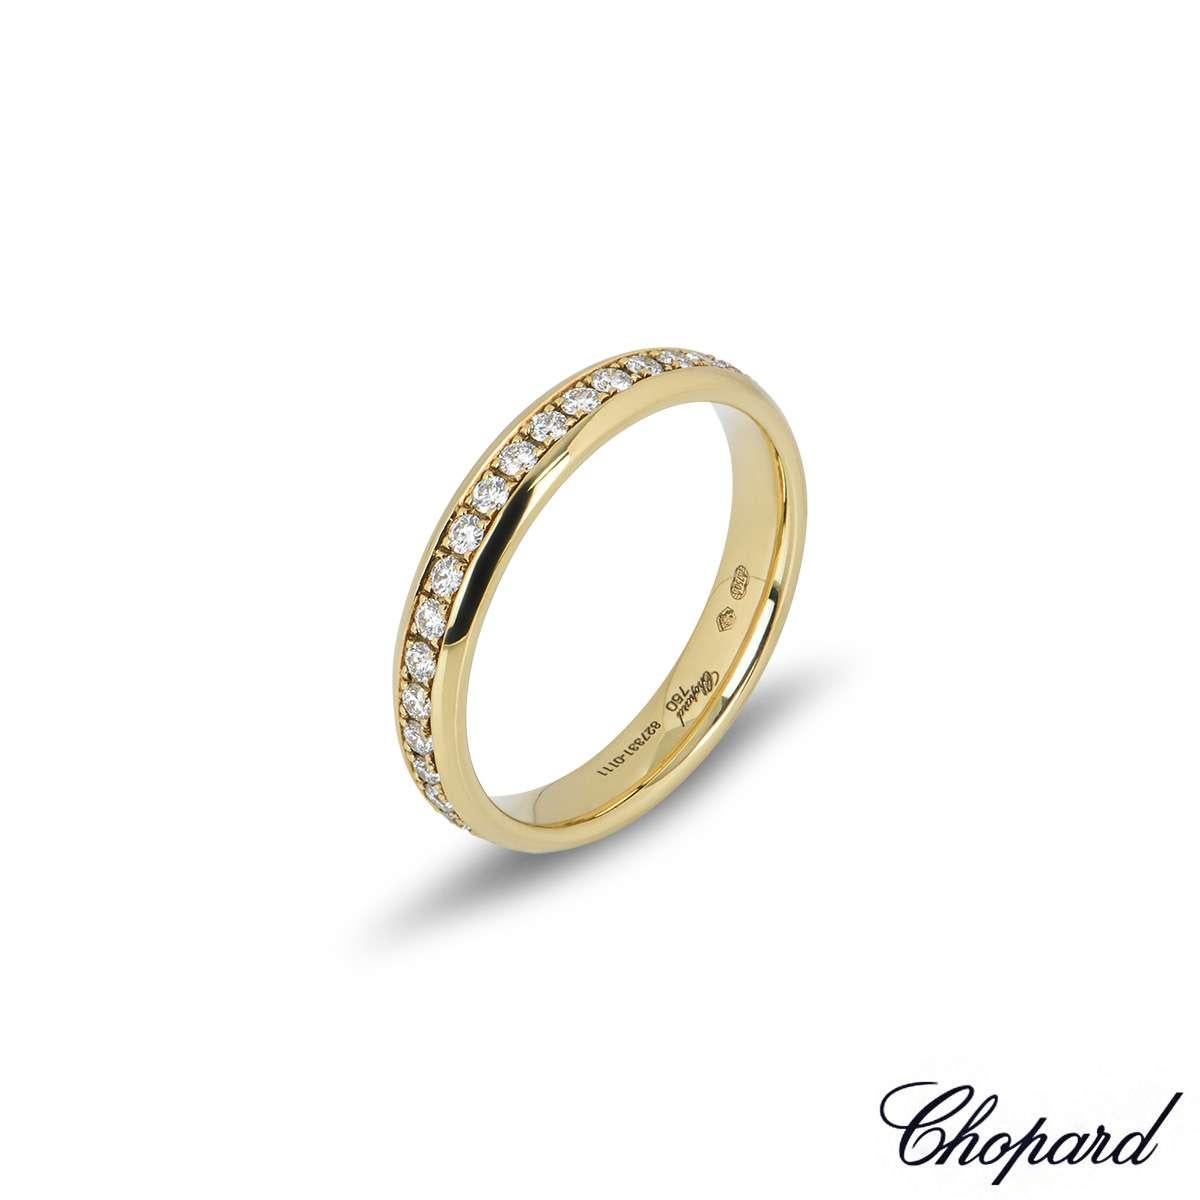 An 18k yellow gold diamond eternity band by Chopard. The ring features 36 round brilliant cut claw set diamonds totalling 0.54ct, F-G colour and IF-VVS in clarity. The 3.5mm wide ring is a size UK N½ - EU 54 - US 6.75 and has a gross weight of 3.7